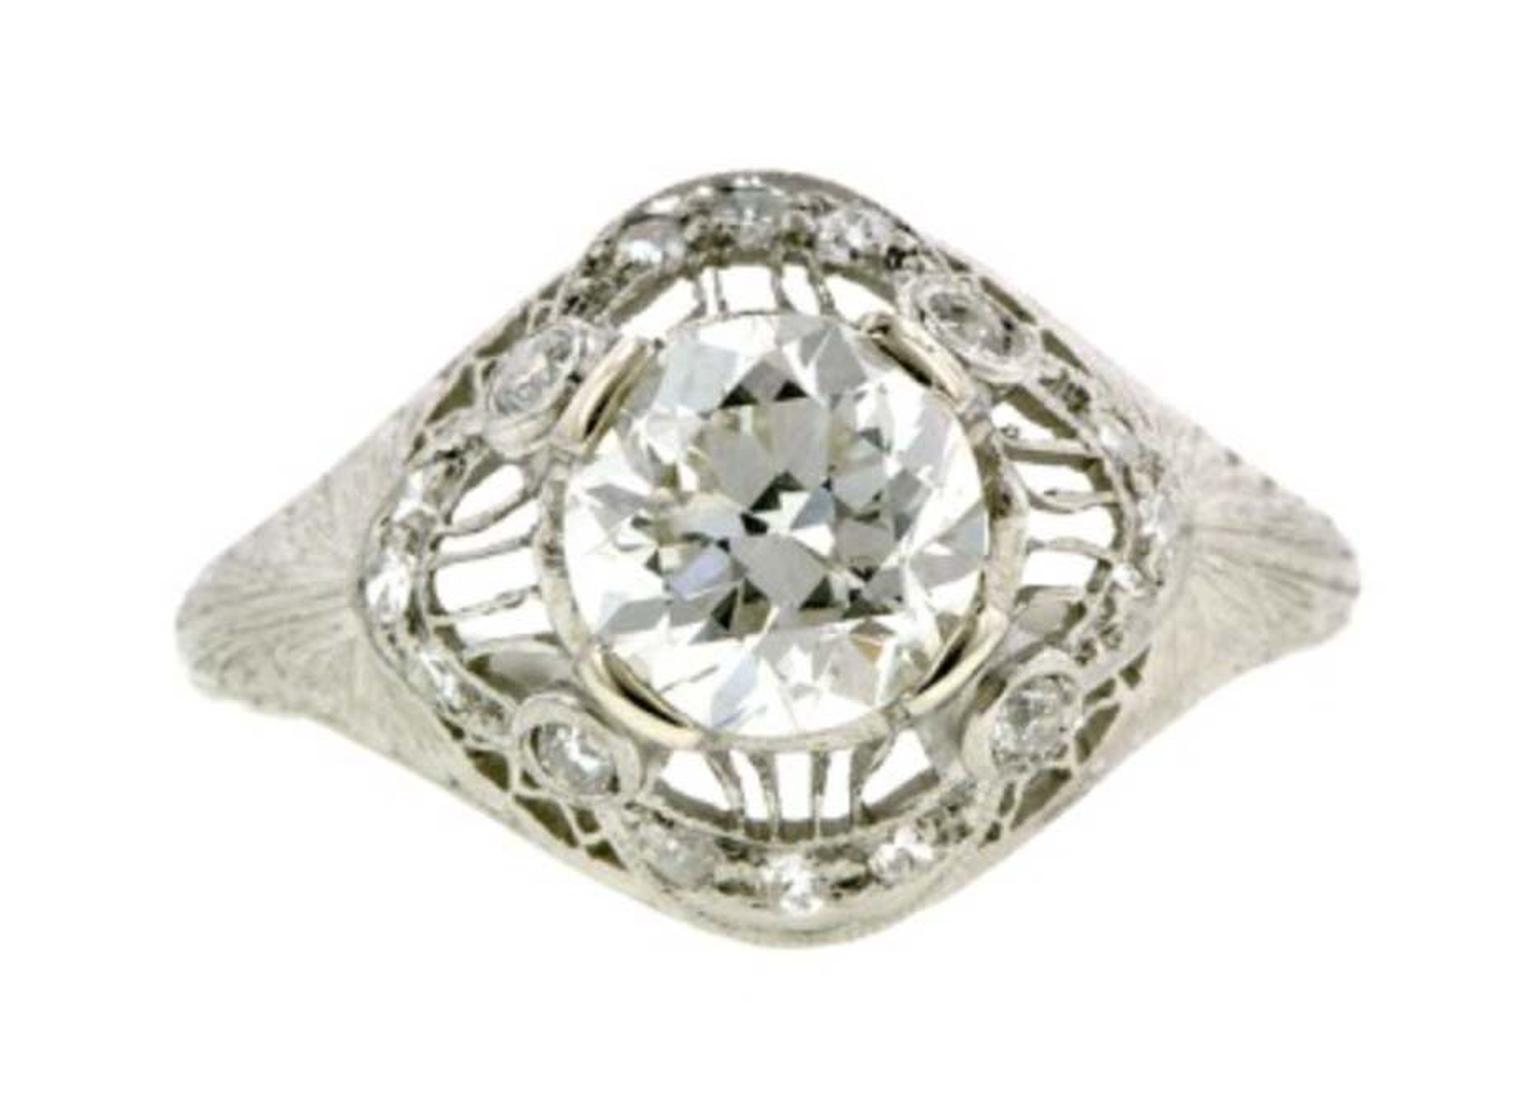 This Edwardian engagement ring circa 1915, available at Doyle & Doyle, centres an old European-cut diamond, additionally set with 12 single-cut diamonds, and four old European-cut diamonds, in an ornate, filigree and swag design with engraved shoulders, f